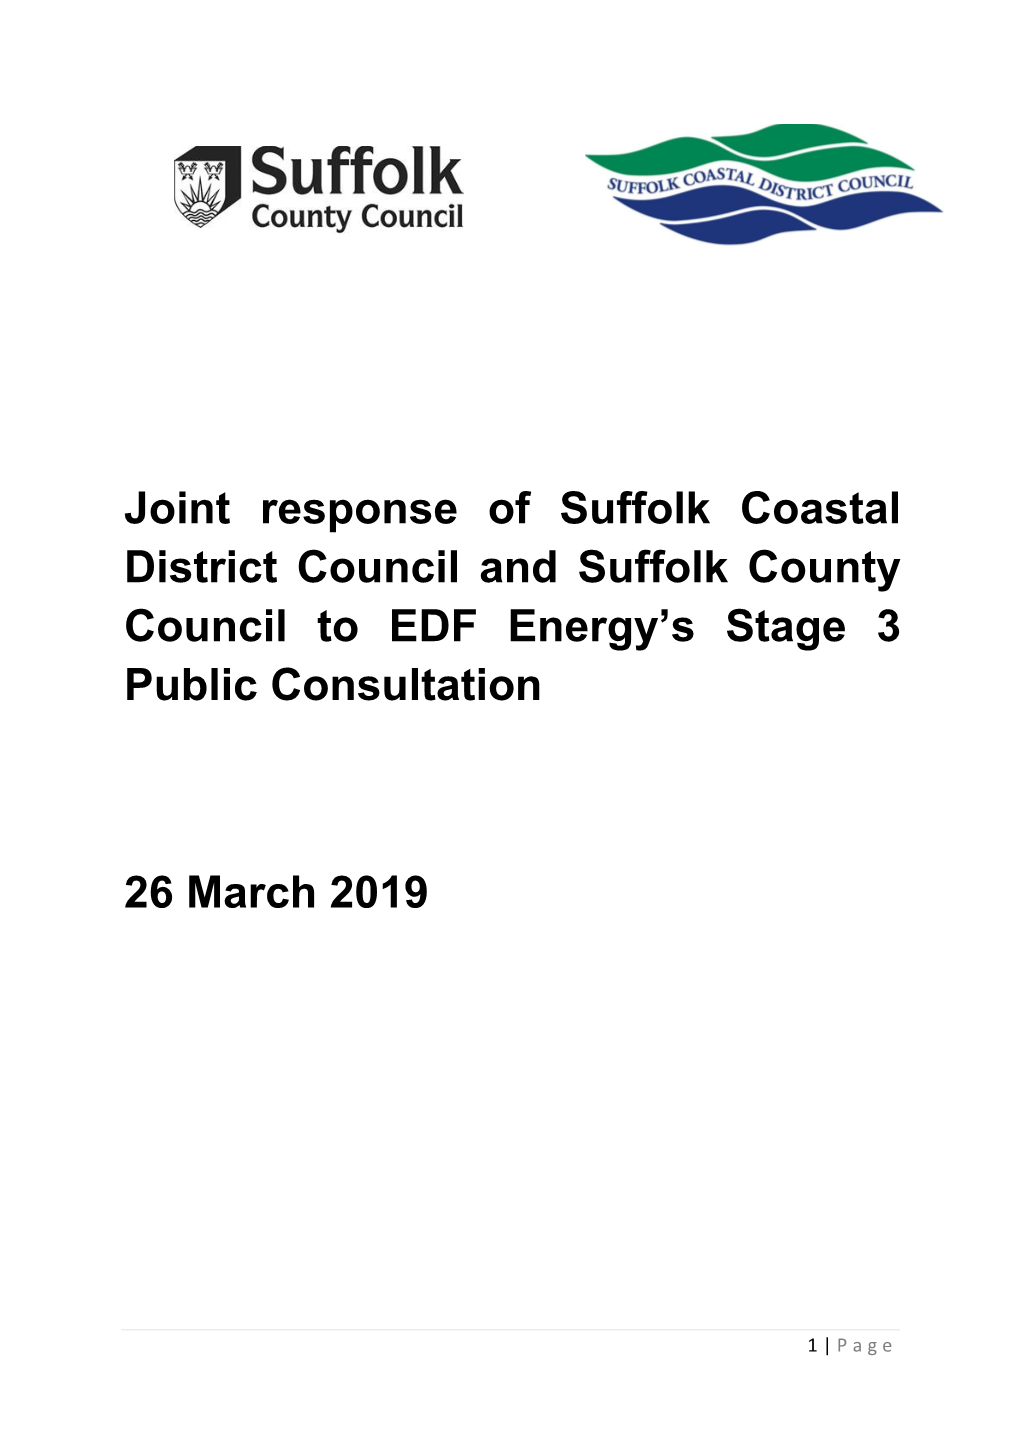 Joint Council Response to the Sizewell C Stage 3 Consultation